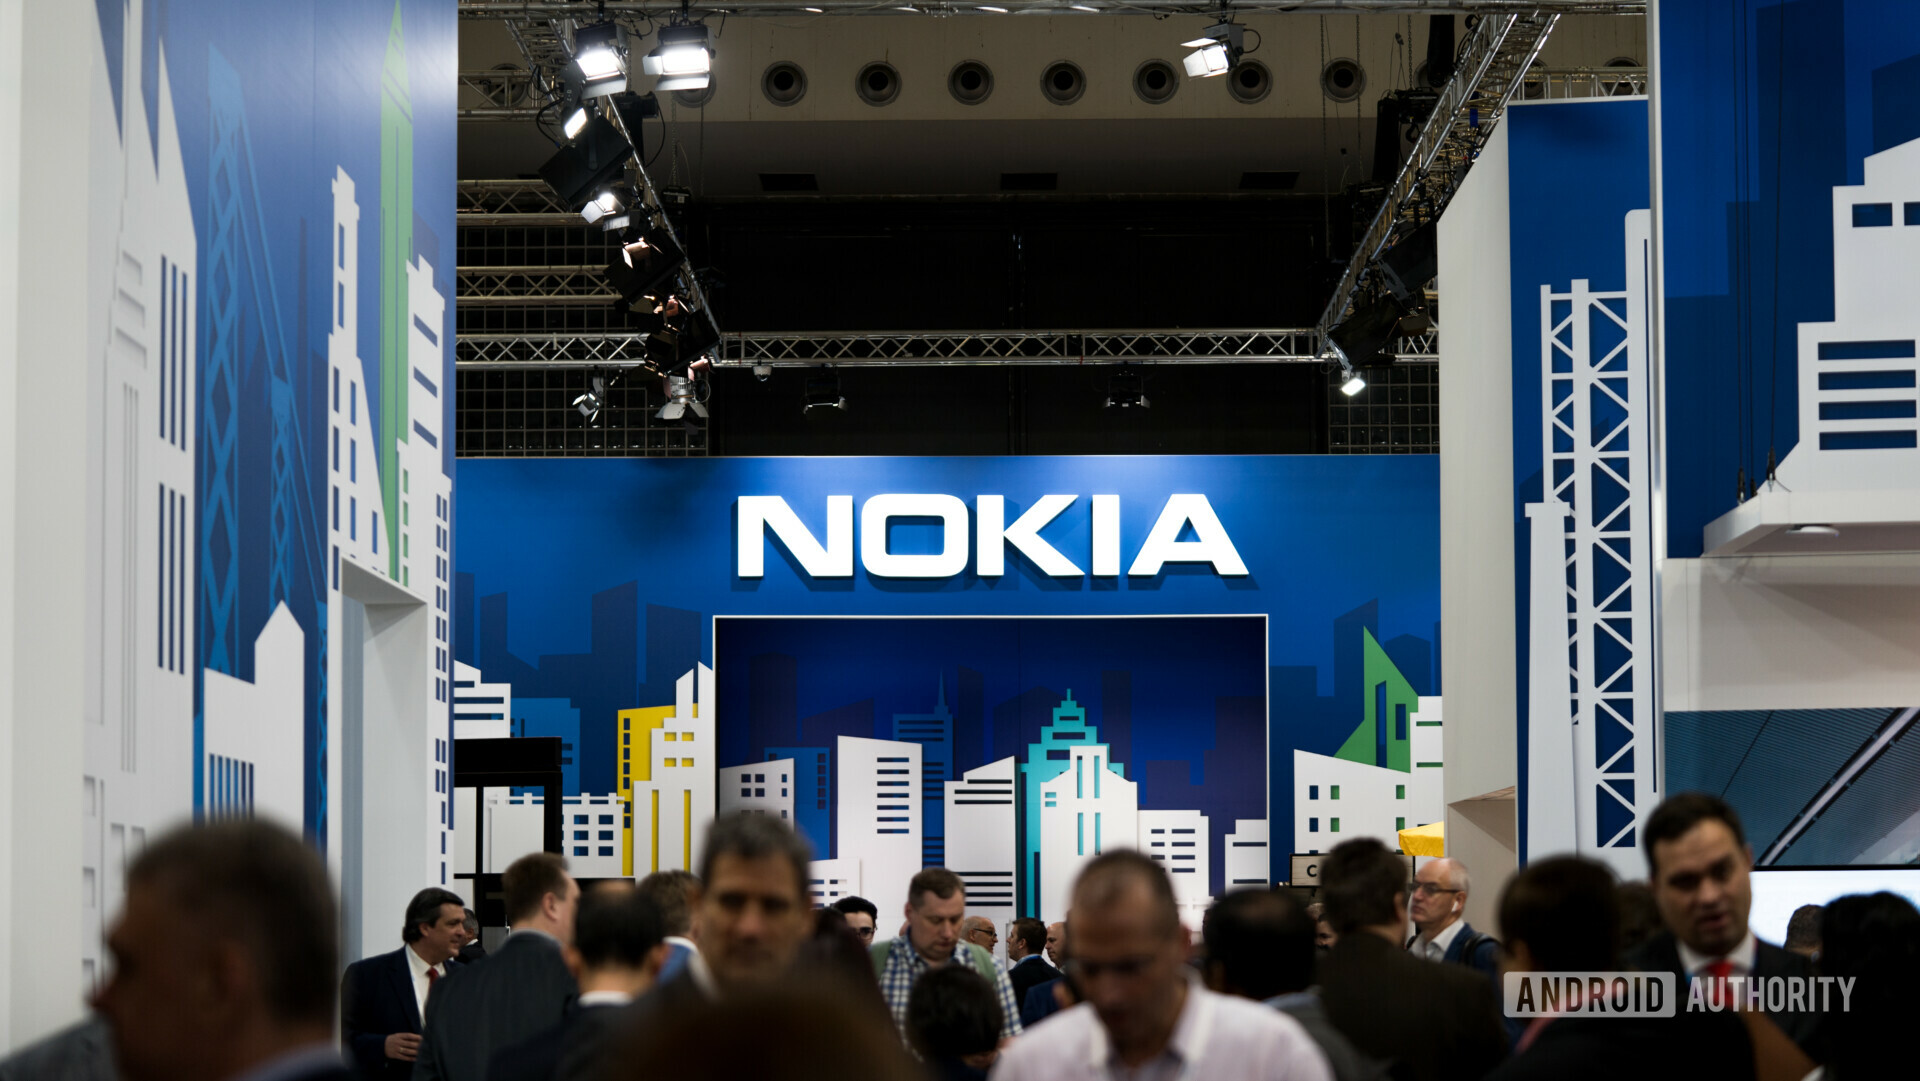 Nokia at CES 2022